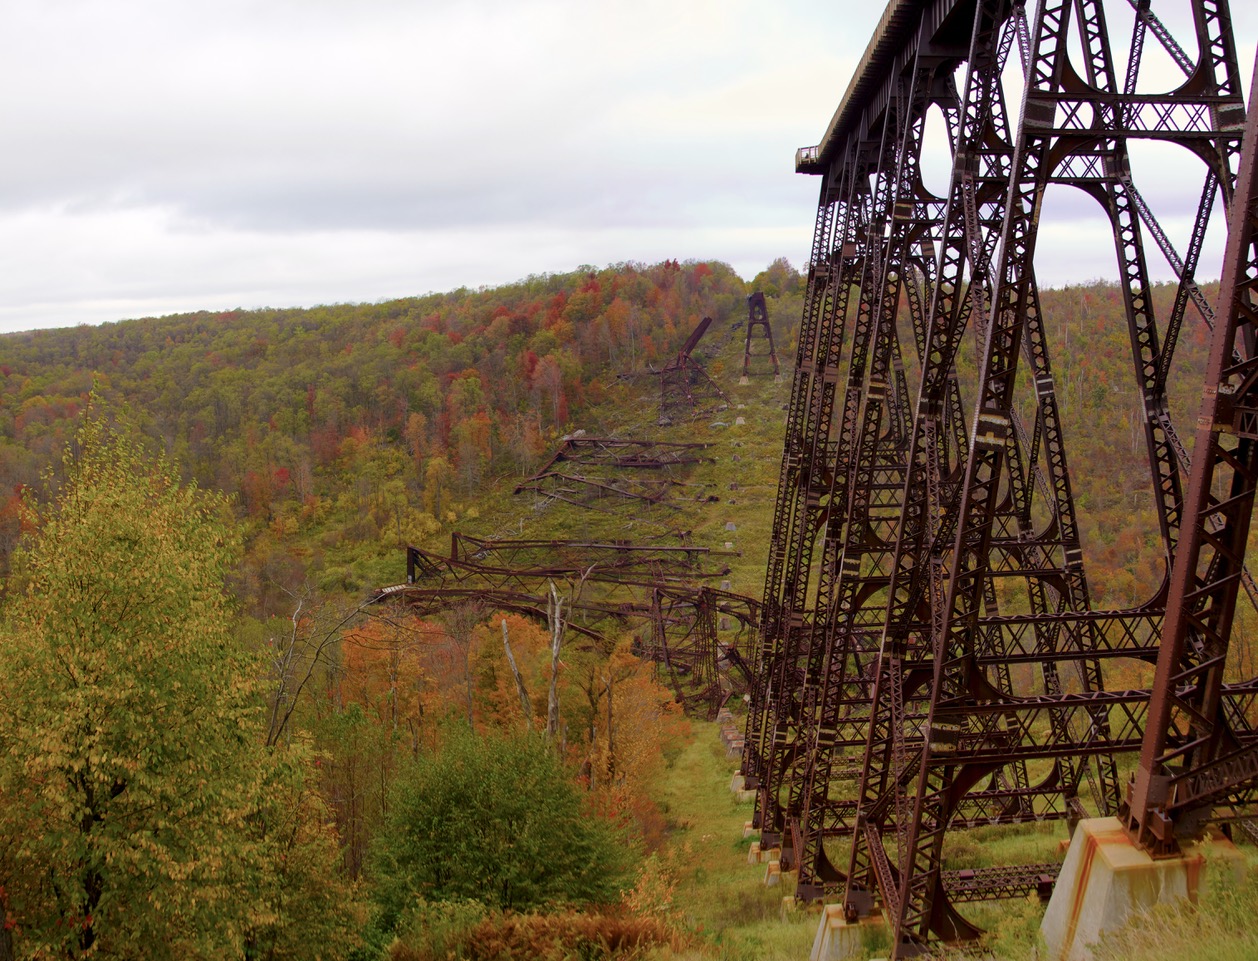 The Kinzua Bridge, a former railway bridge of the Erie Railroad in McKean County, southwestern Pennsylvania. The bridge collapsed in 2003 as a result of a tornado. (Photograph/Courtesy Argentine Productions)